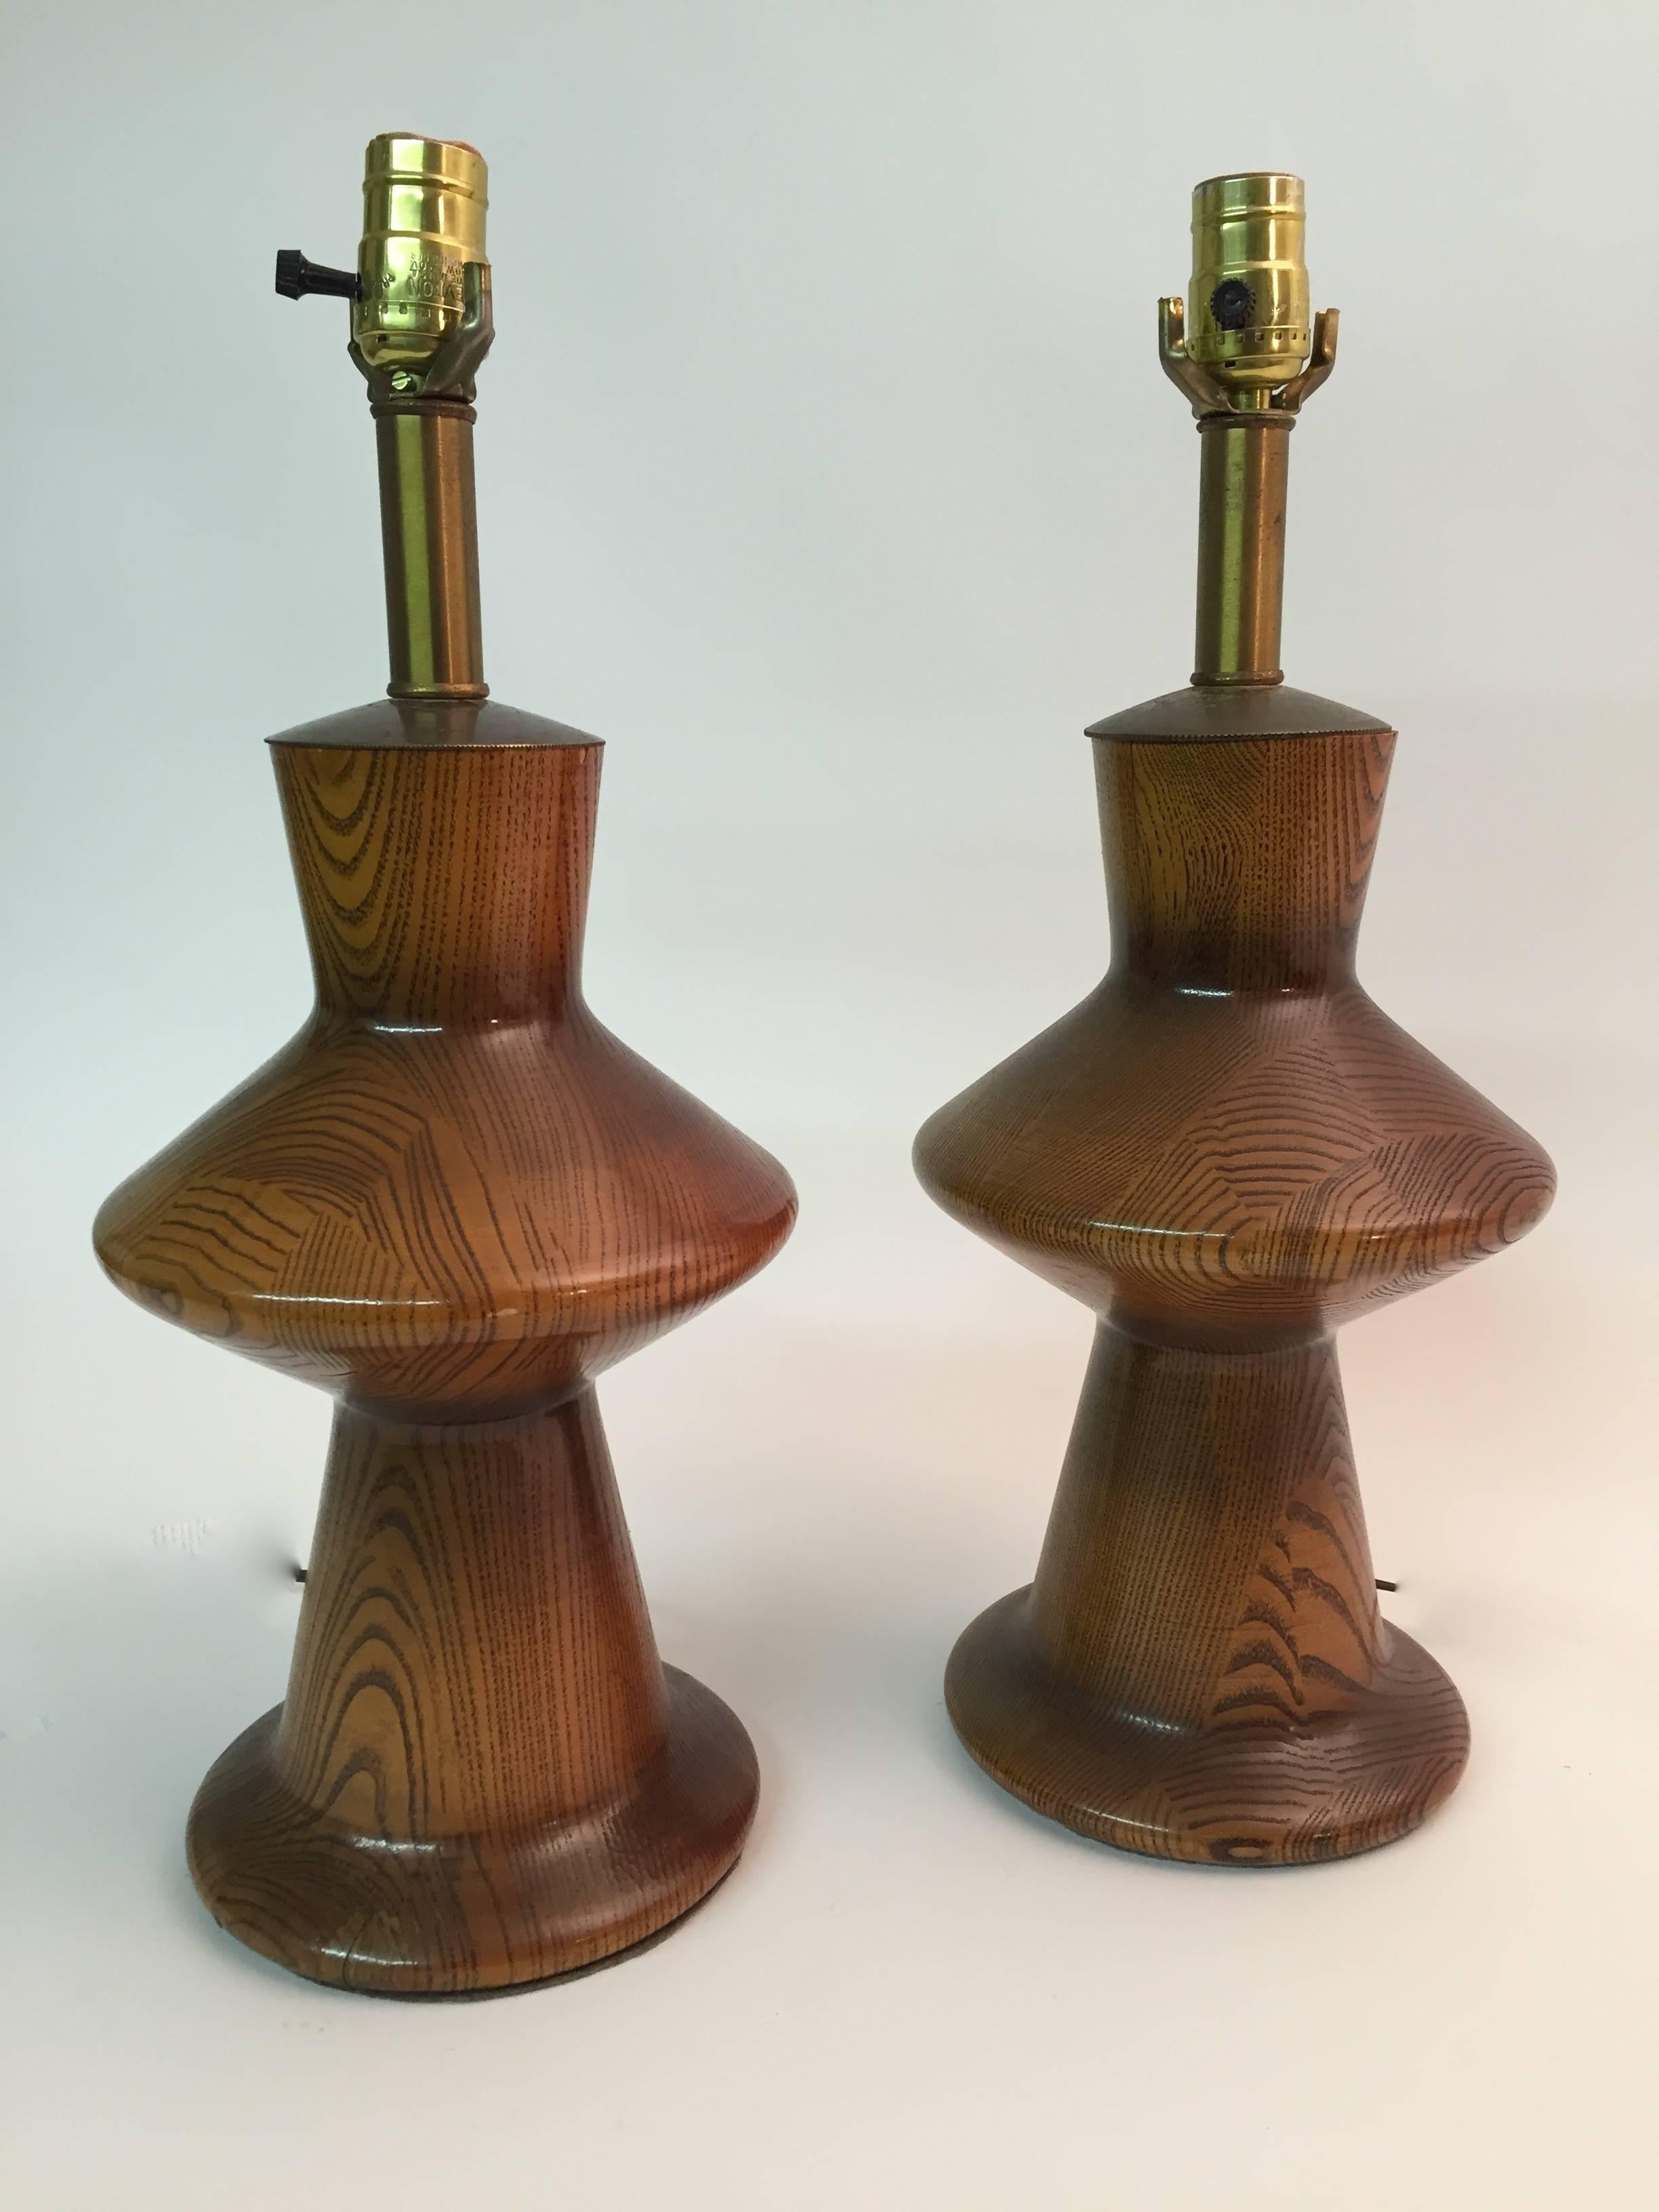 Gorgeous pair of turned oak modern lamps, circa 1950-1960. Original wiring in working condition. Harps not included.